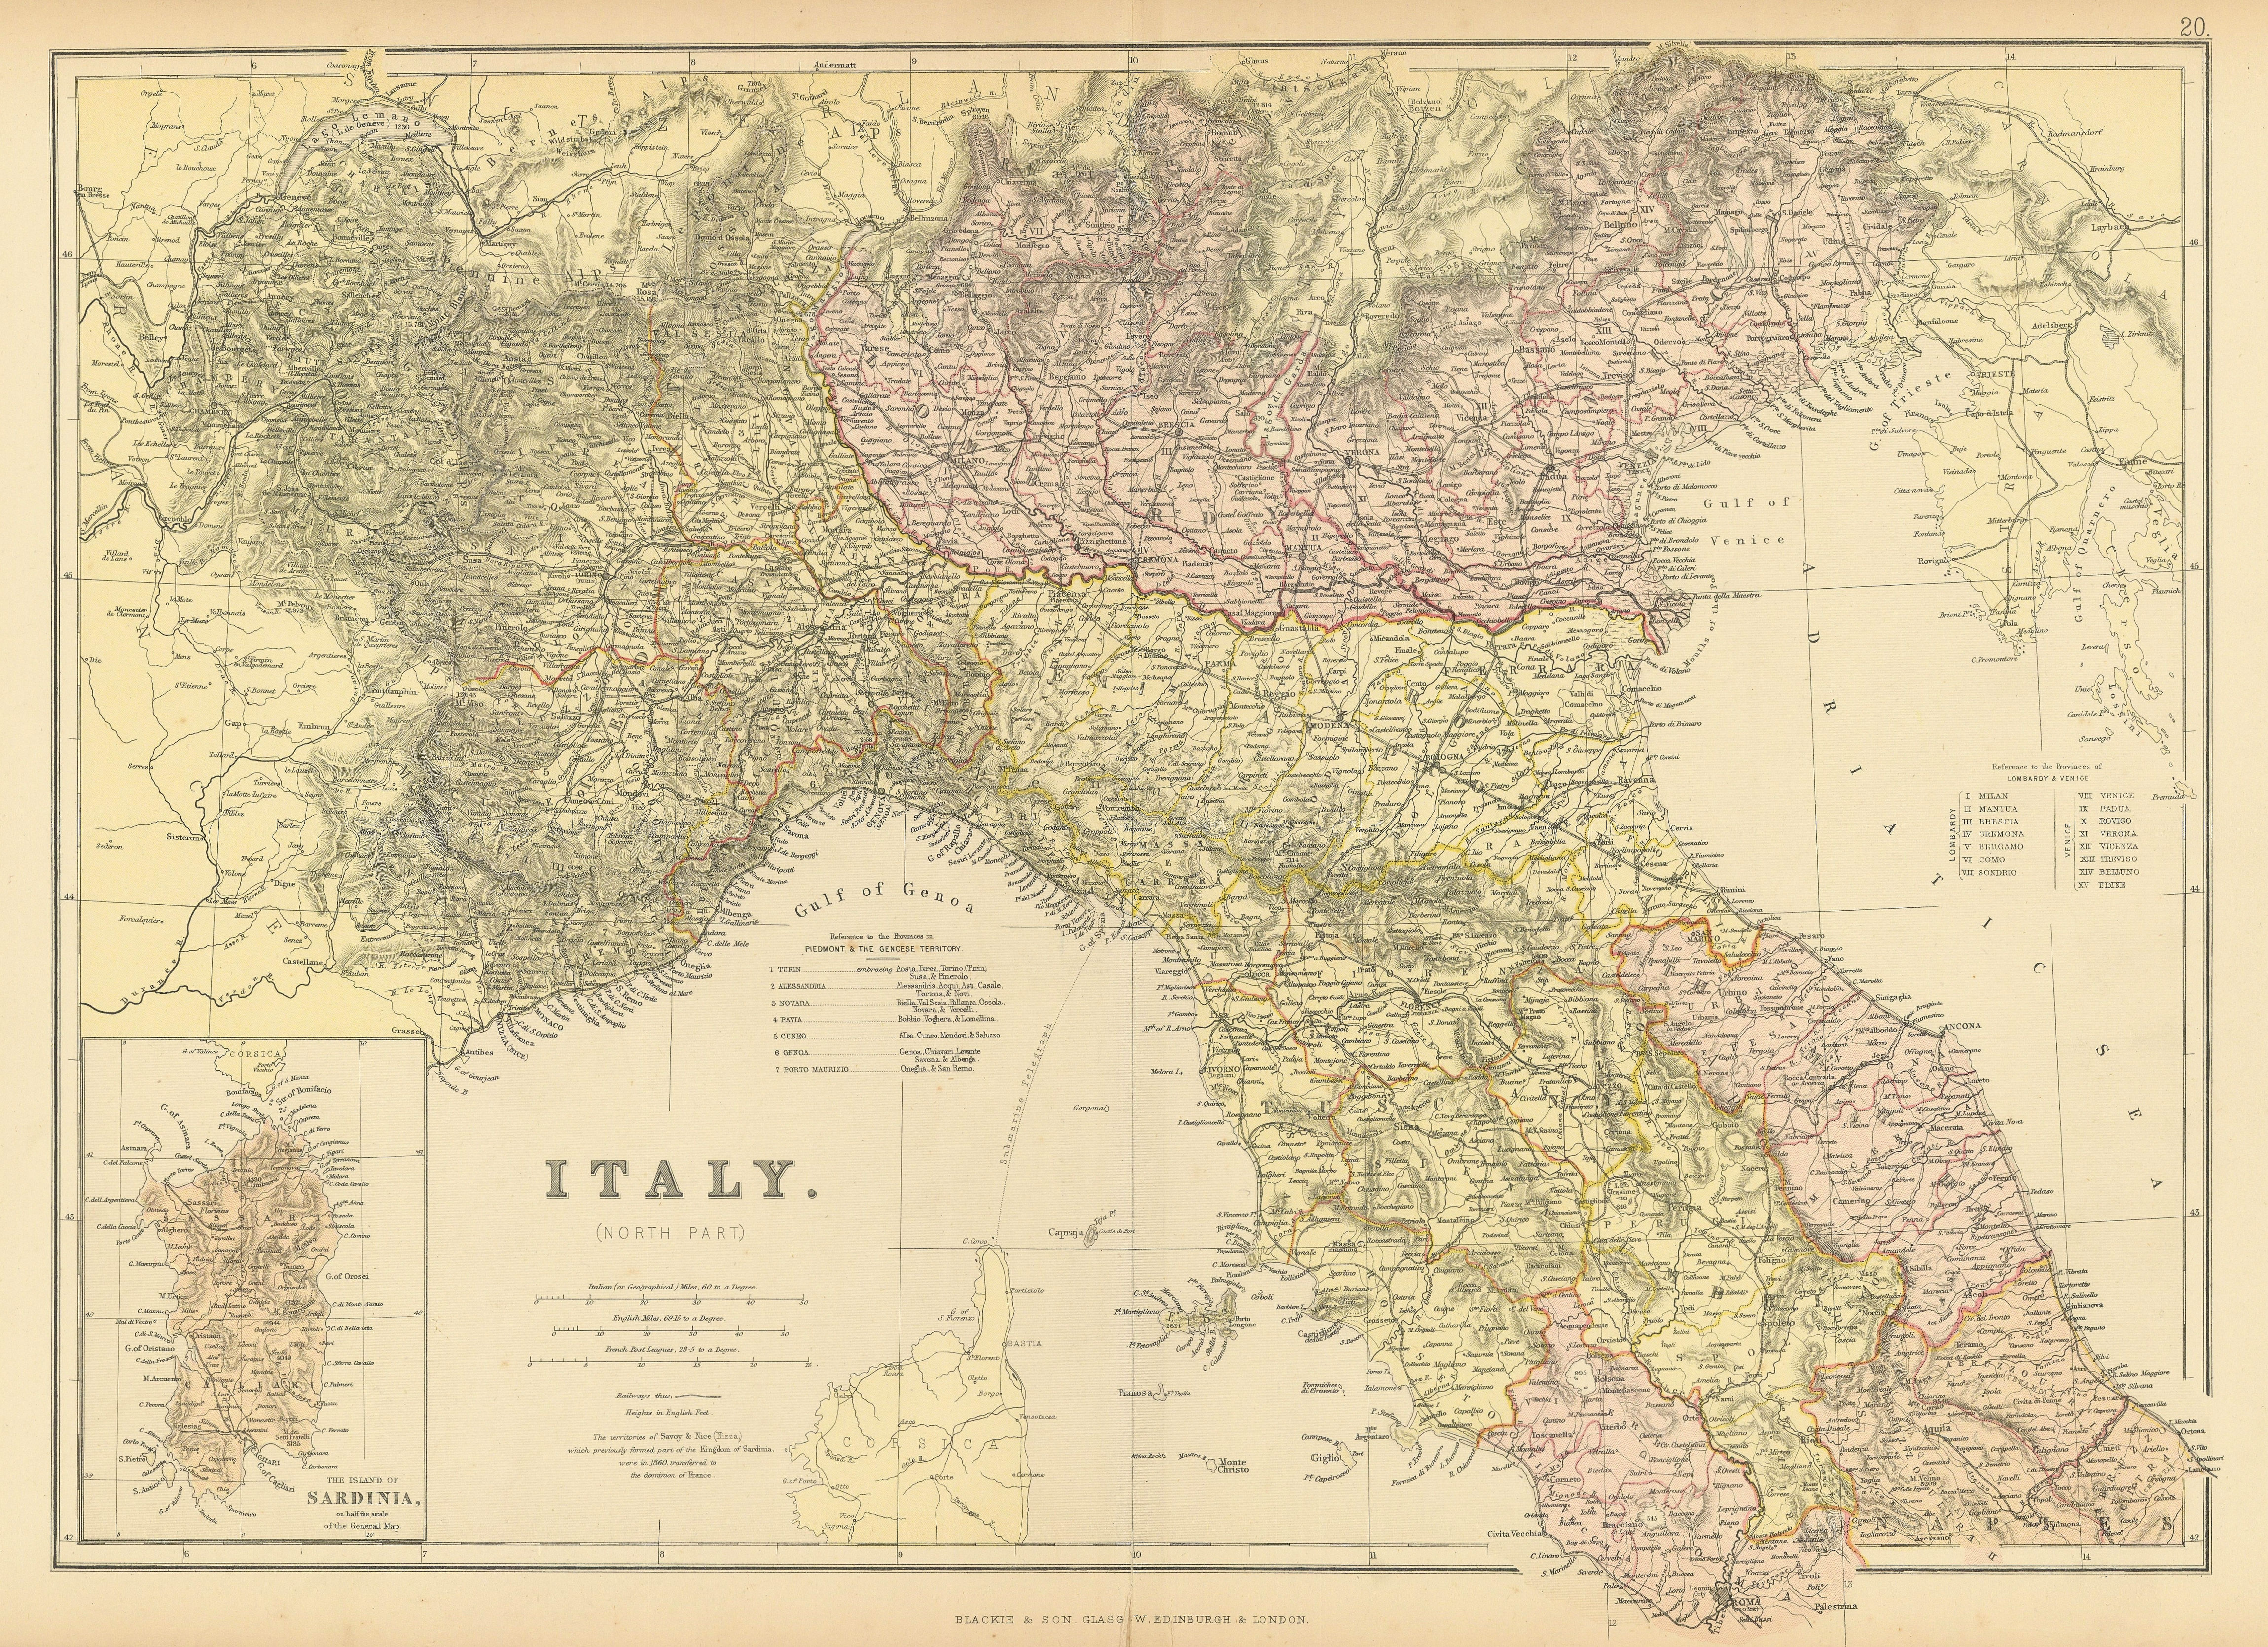 Associate Product ITALY NORTH. Showing provinces & railways. BLACKIE 1886 old antique map chart